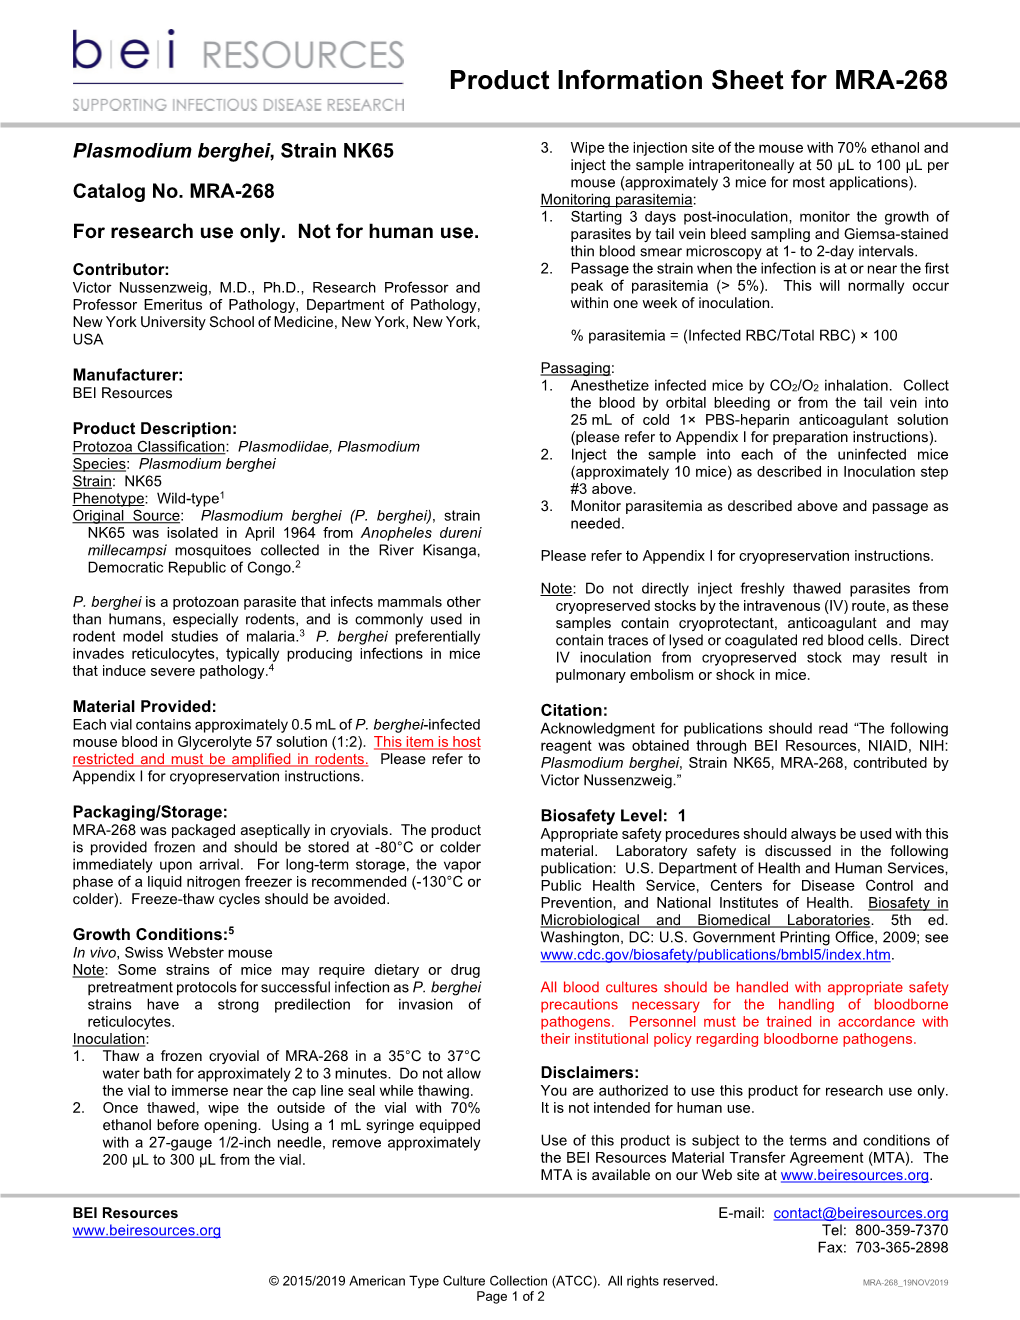 BEI Resources Product Information Sheet Catalog No. MRA-268